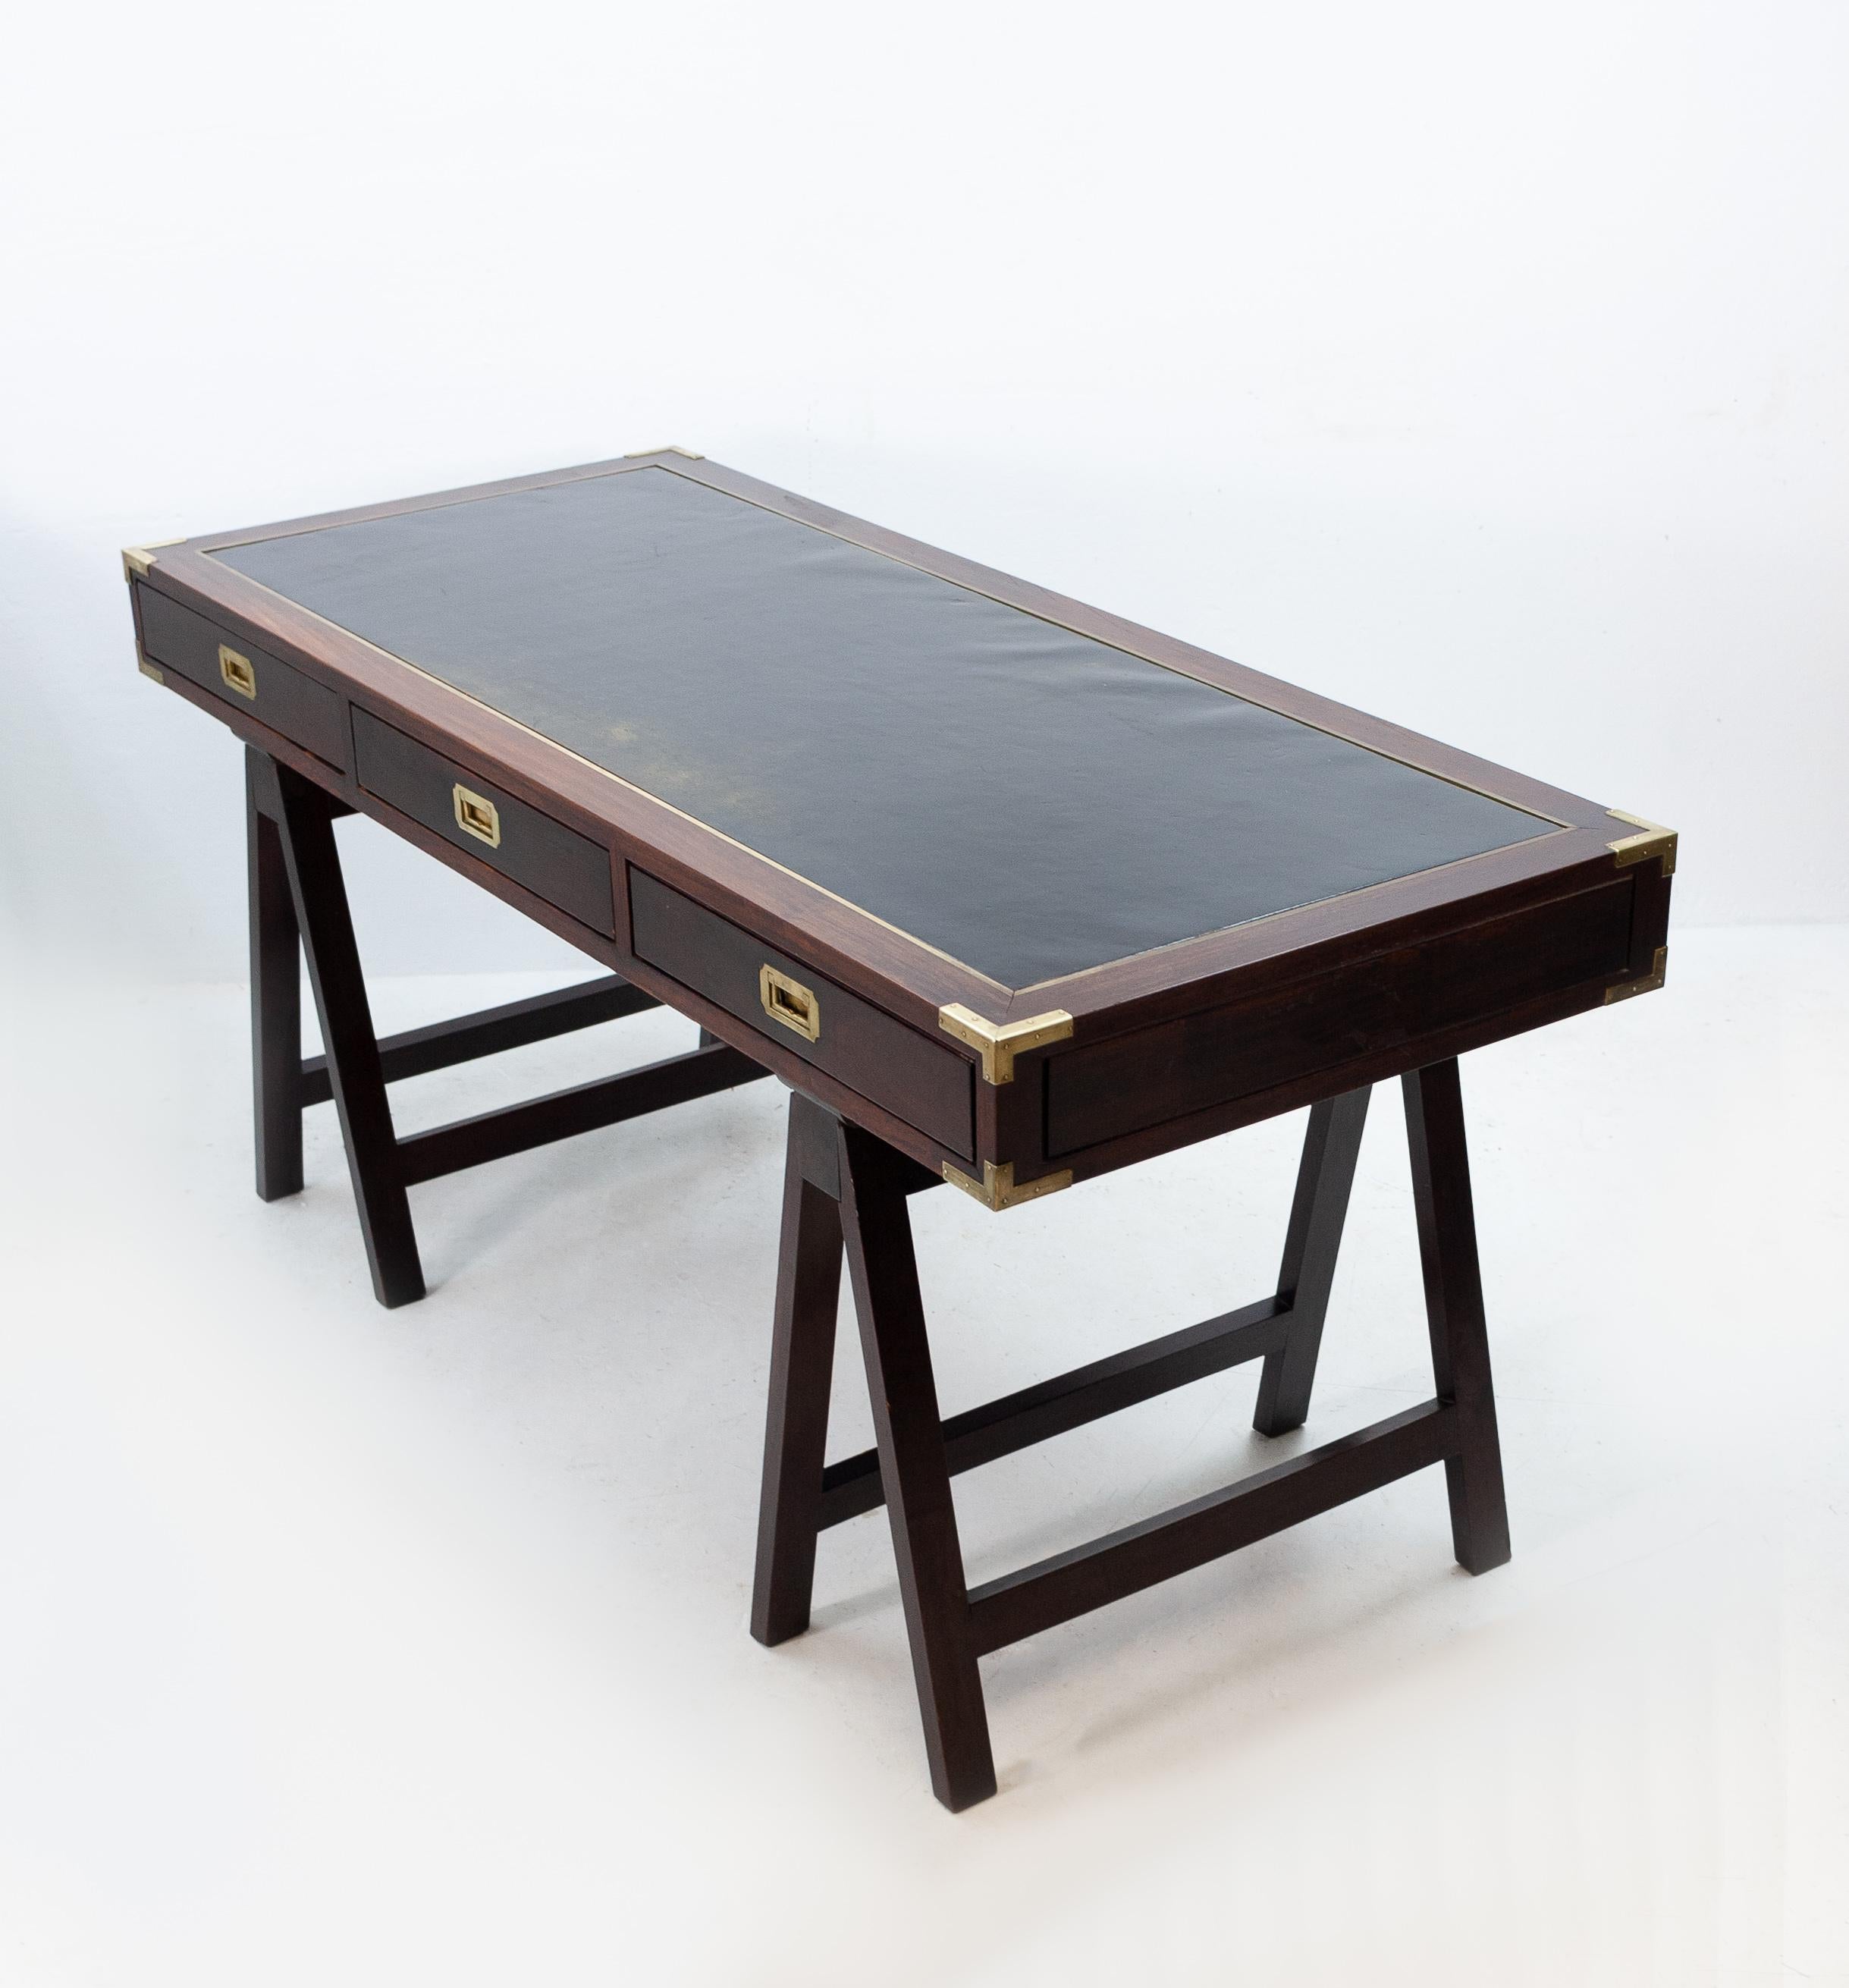 Campaign desks were used by military officers and their staffs during military campaigns and were, typically, the private property of the officer. This desk looks like a design by Charlotte Horstmann Hong Kong antiques dealer and furniture maker.